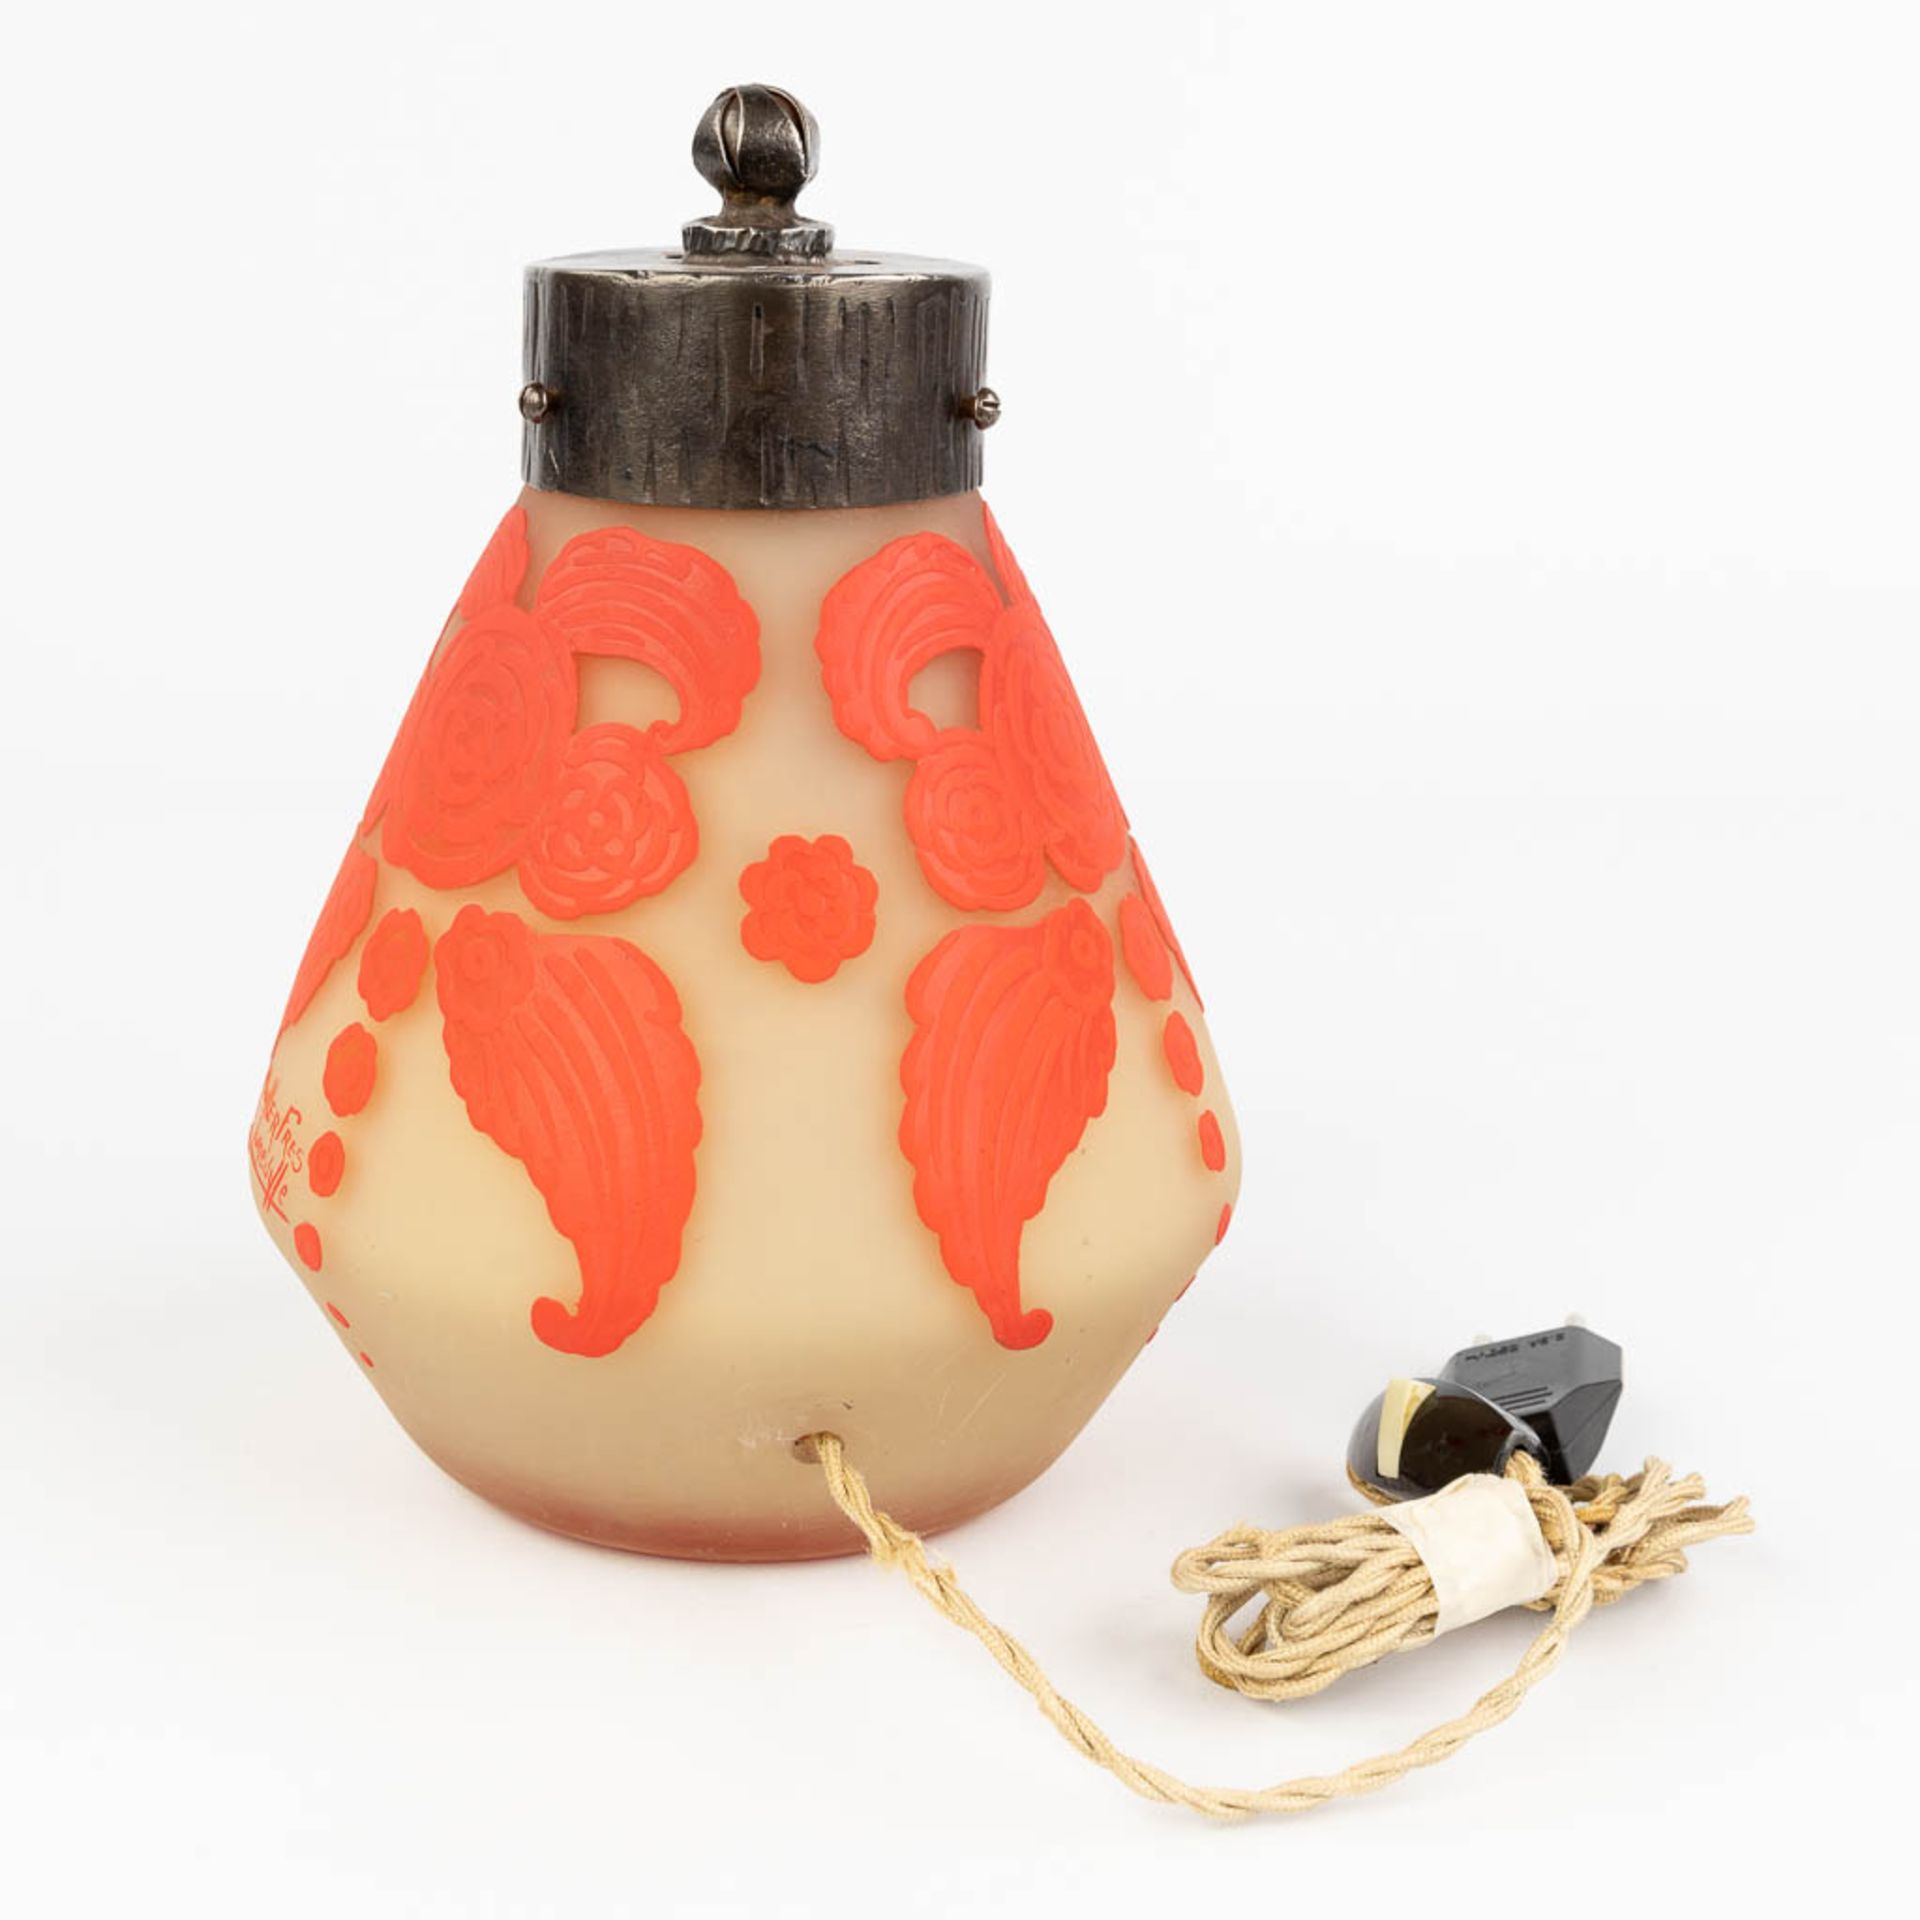 An exceptional 'Veilleuse' table lamp, marked Muller Frres LunŽville. (H:24 x D:17 cm) - Image 12 of 12